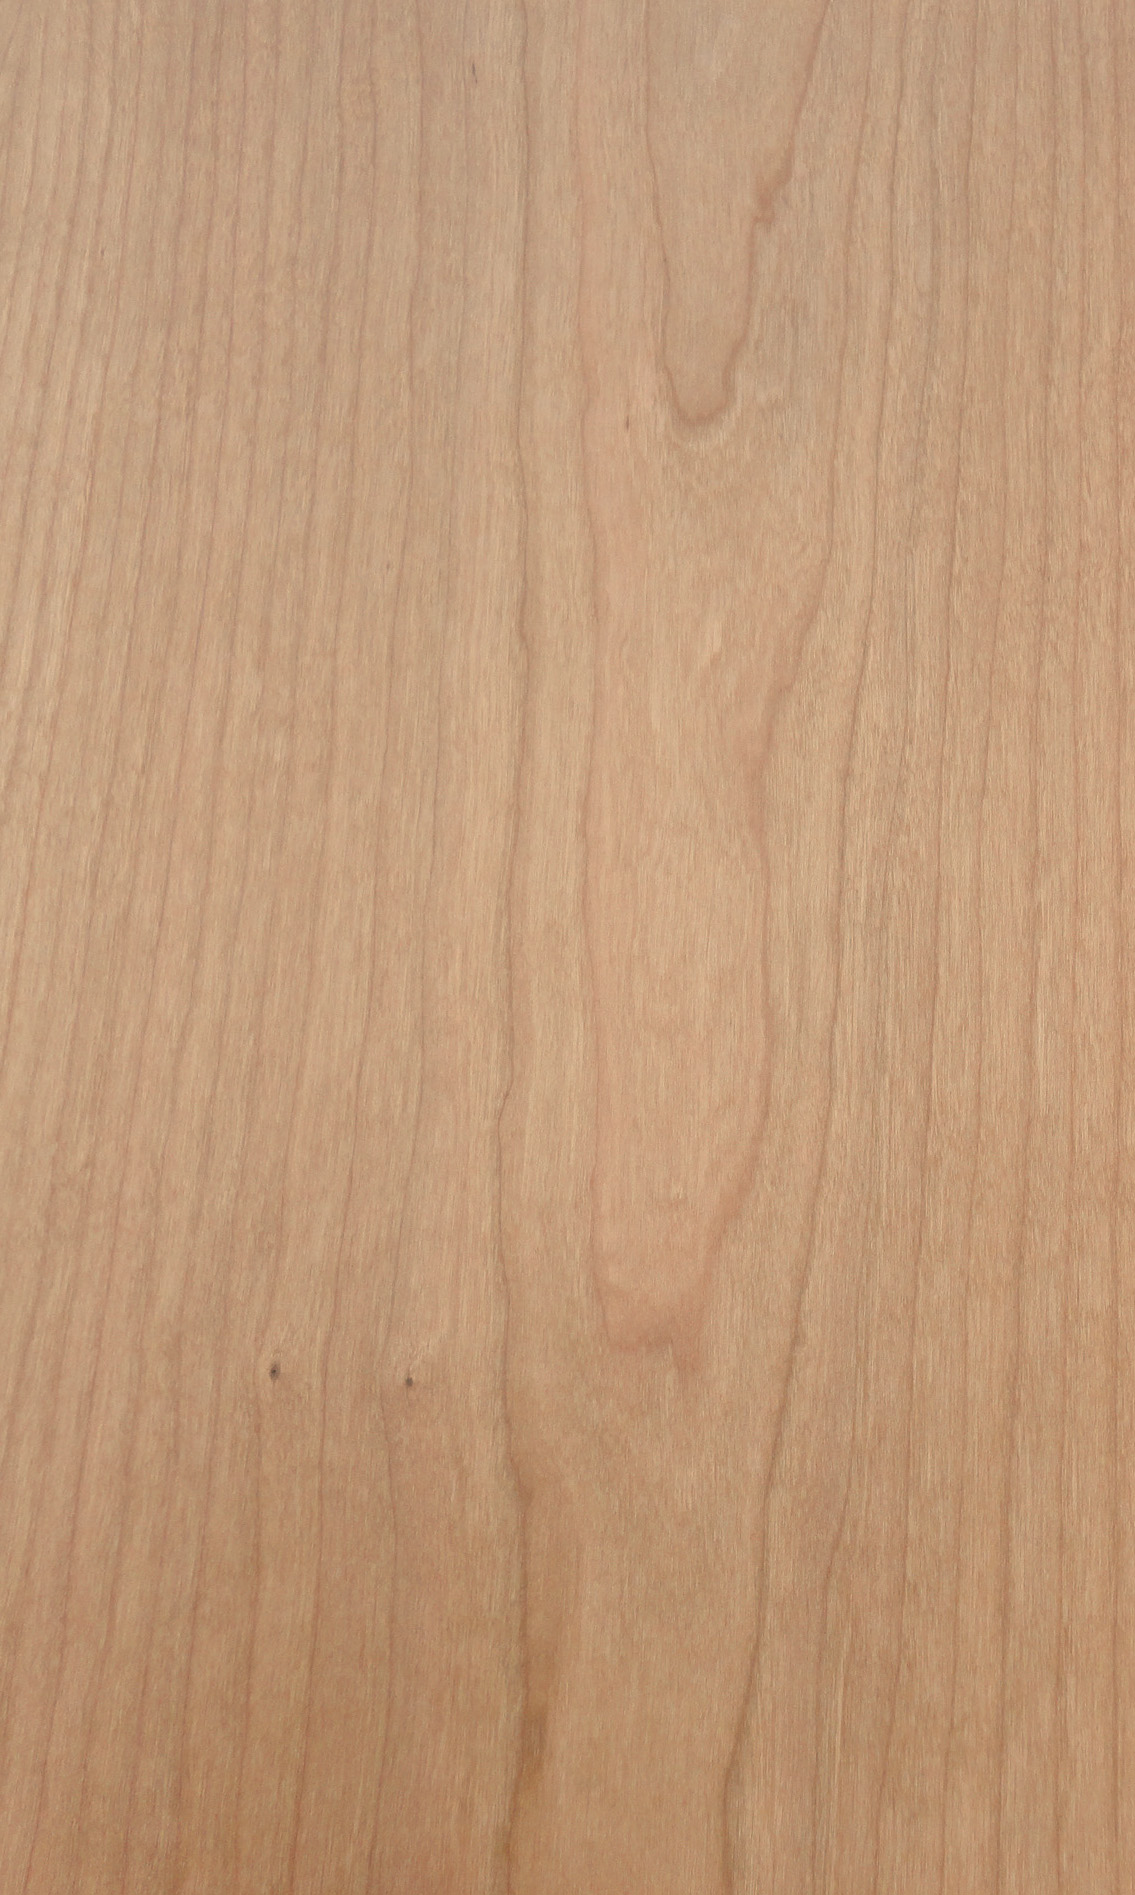 Cherry wood veneer 12 x 96 with wood backer 1/25 thickness A grade quality